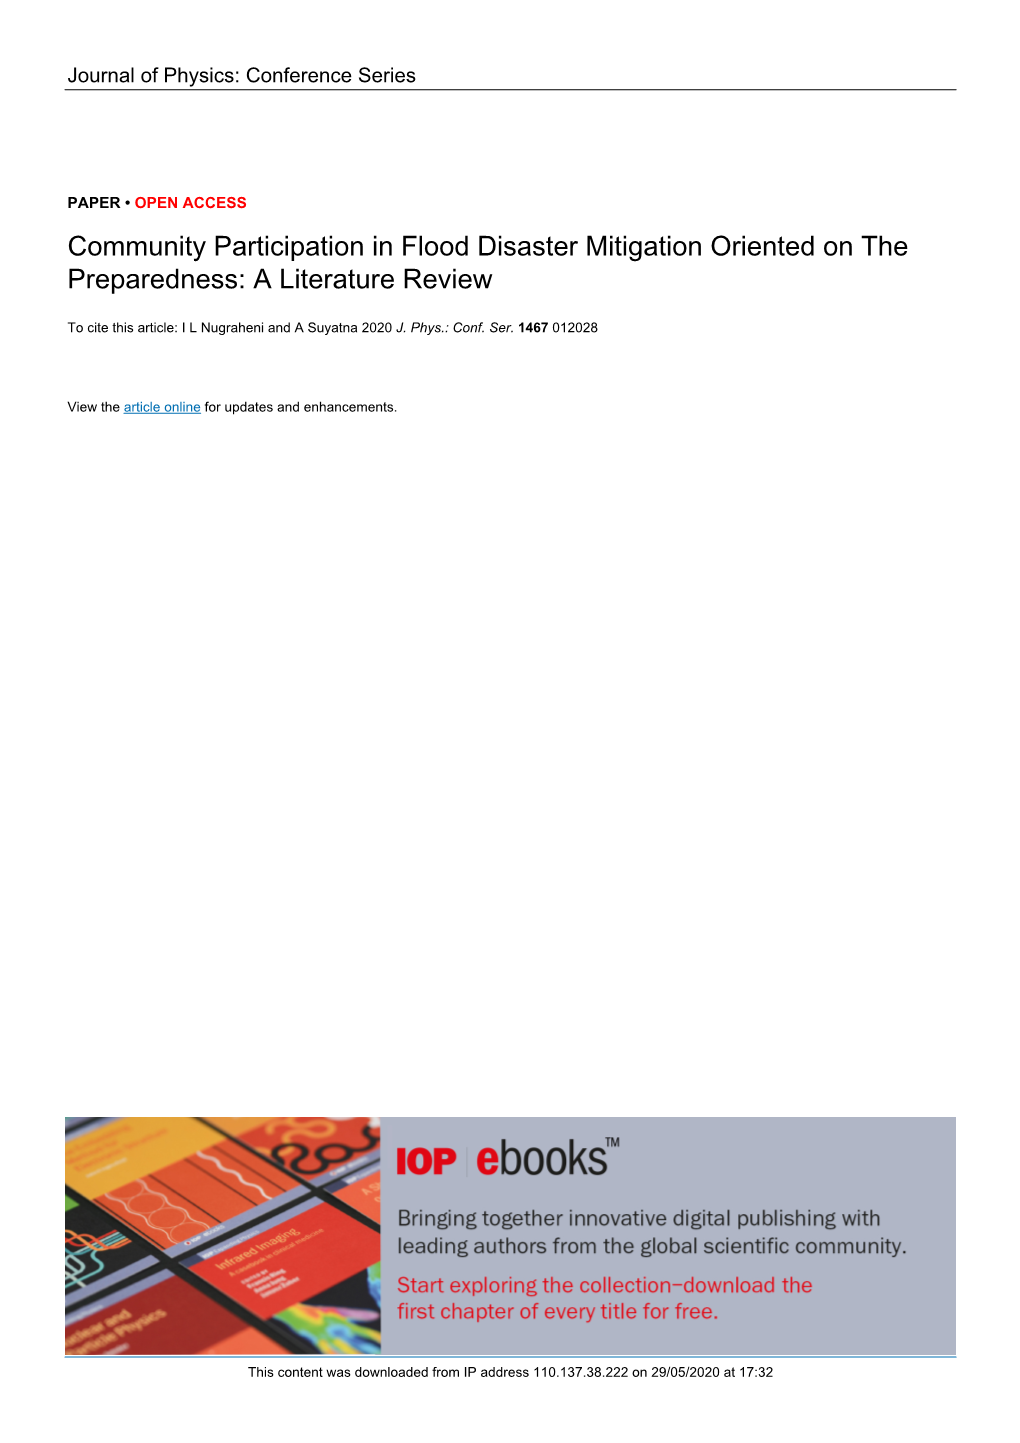 Community Participation in Flood Disaster Mitigation Oriented on the Preparedness: a Literature Review